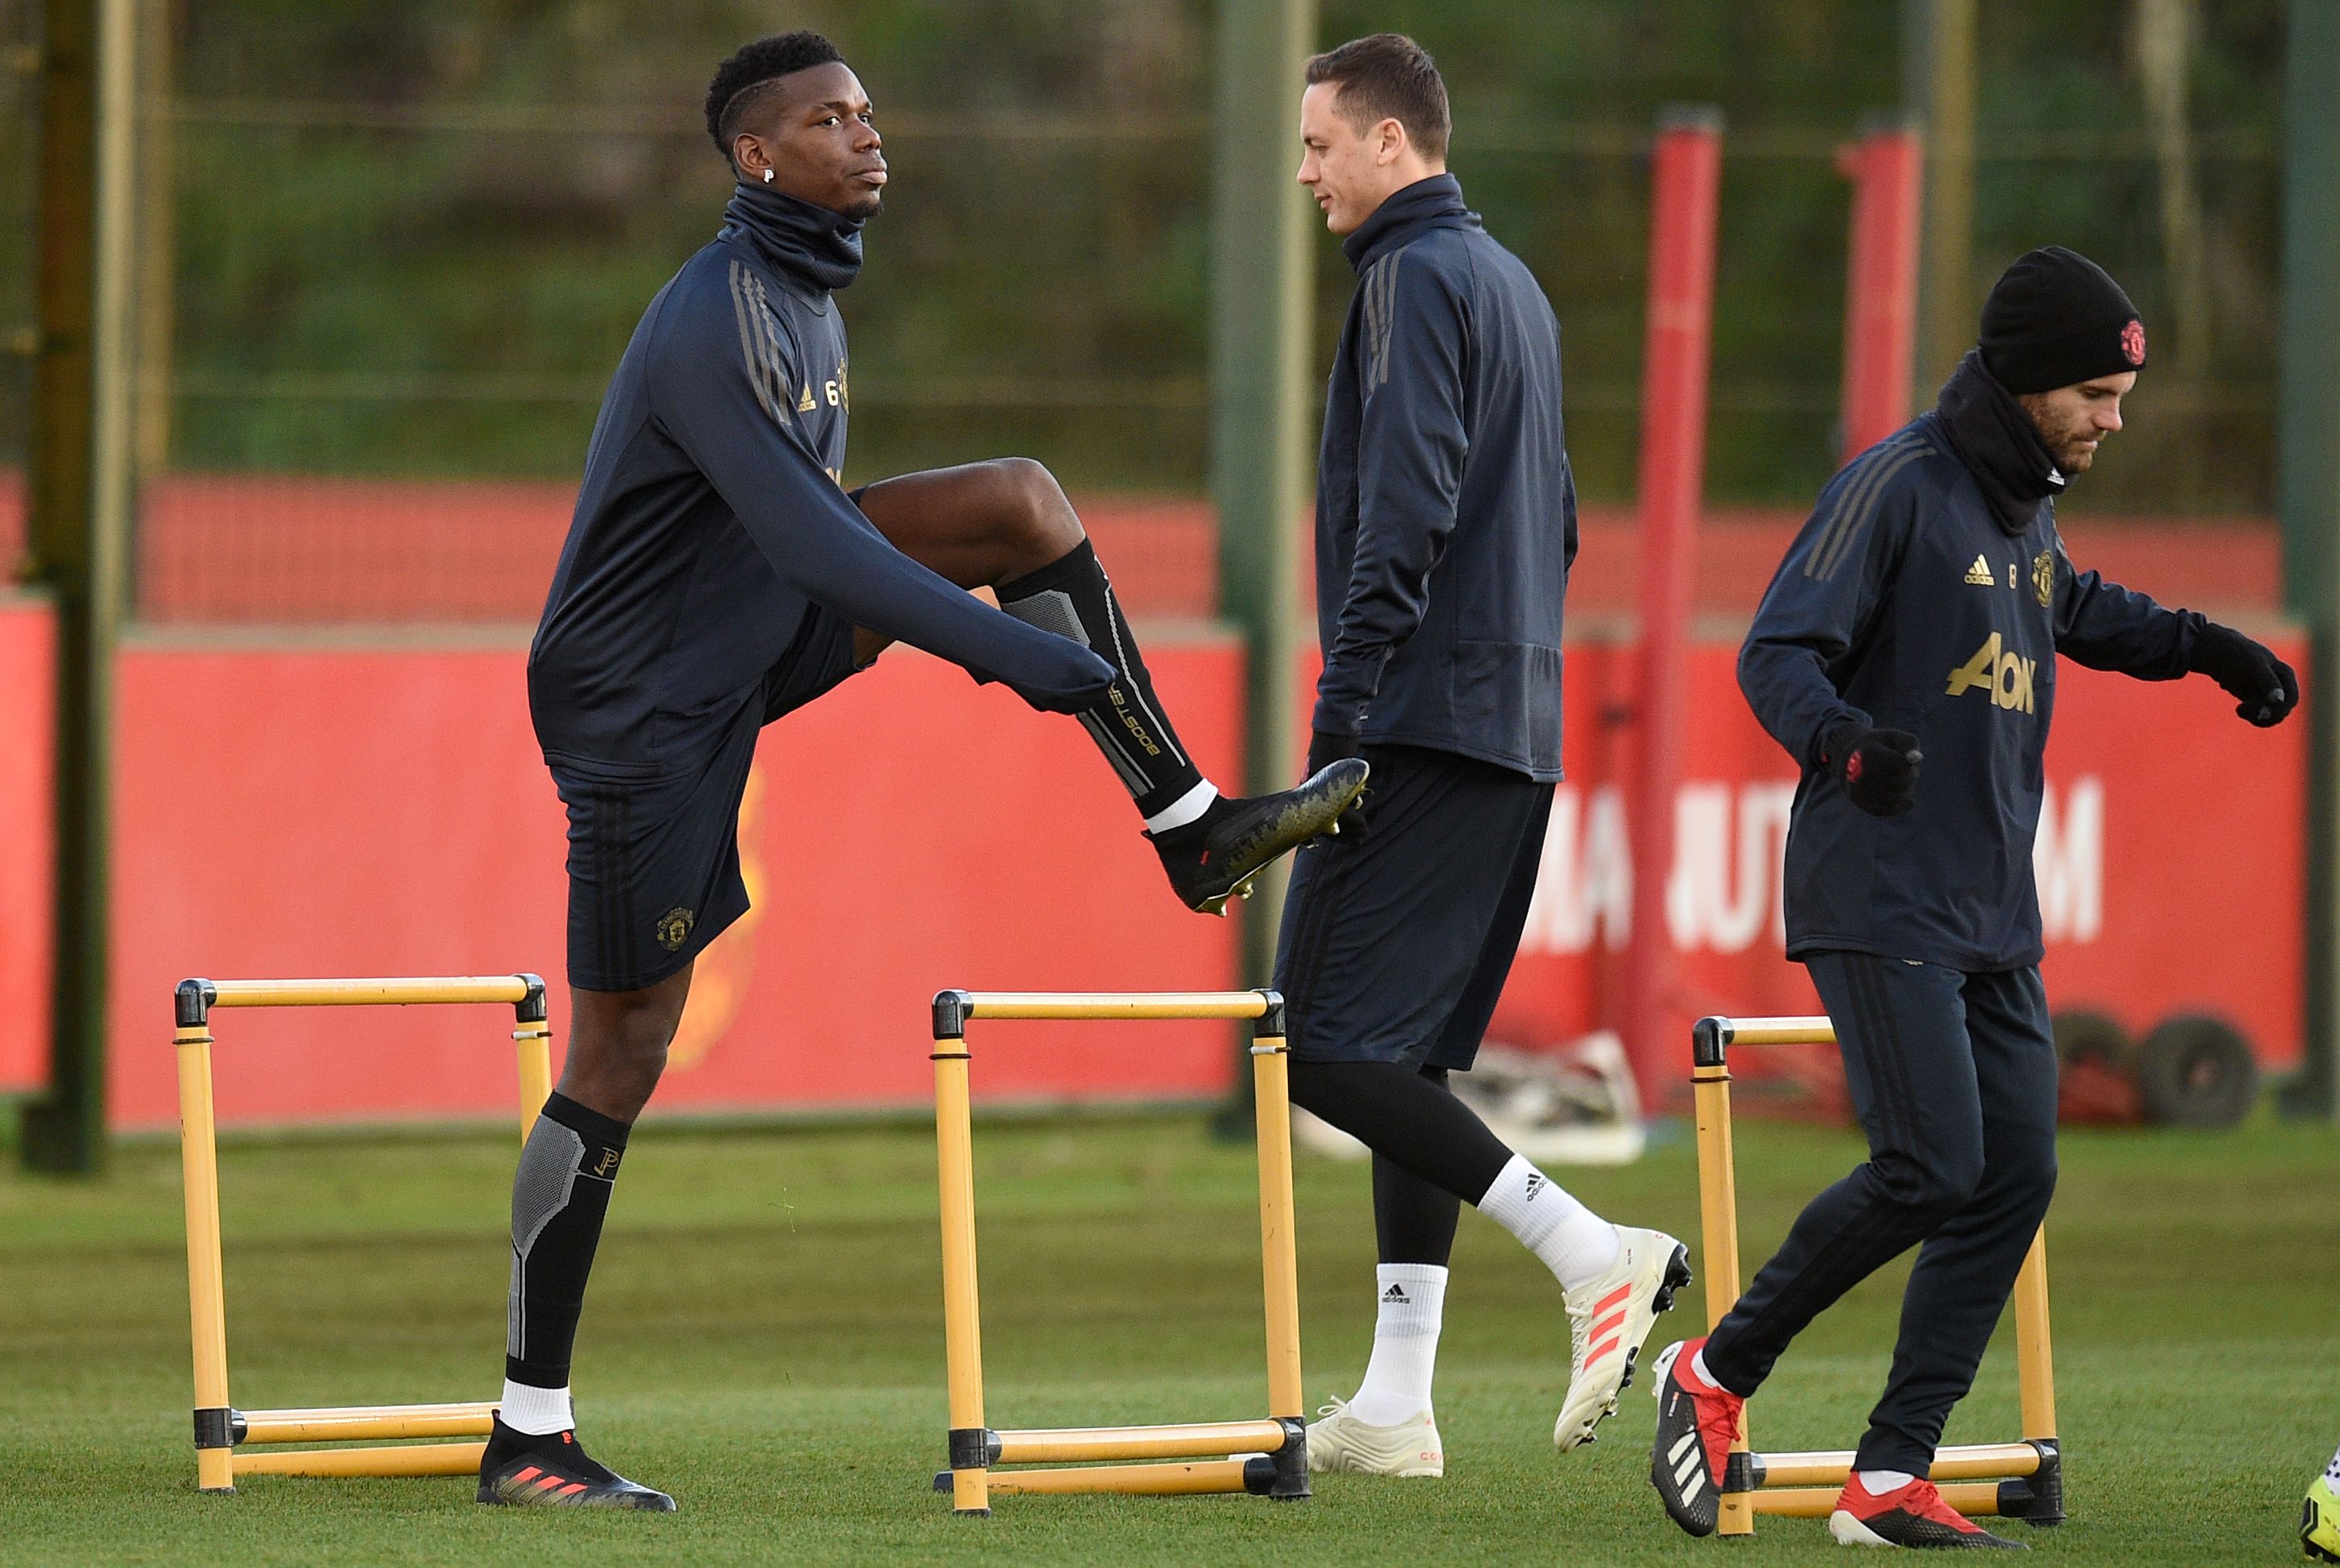 Manchester United's French midfielder Paul Pogba (L), Manchester United's Serbian midfielder Nemanja Matic (C) and Manchester United's Spanish midfielder Juan Mata attend a training session at the Carrington Training complex in Manchester, north west England on November 26, 2018, on the eve of their UEFA Champions League group H football match against Young Boys. (Photo by Oli SCARFF / AFP)        (Photo credit should read OLI SCARFF/AFP/Getty Images)